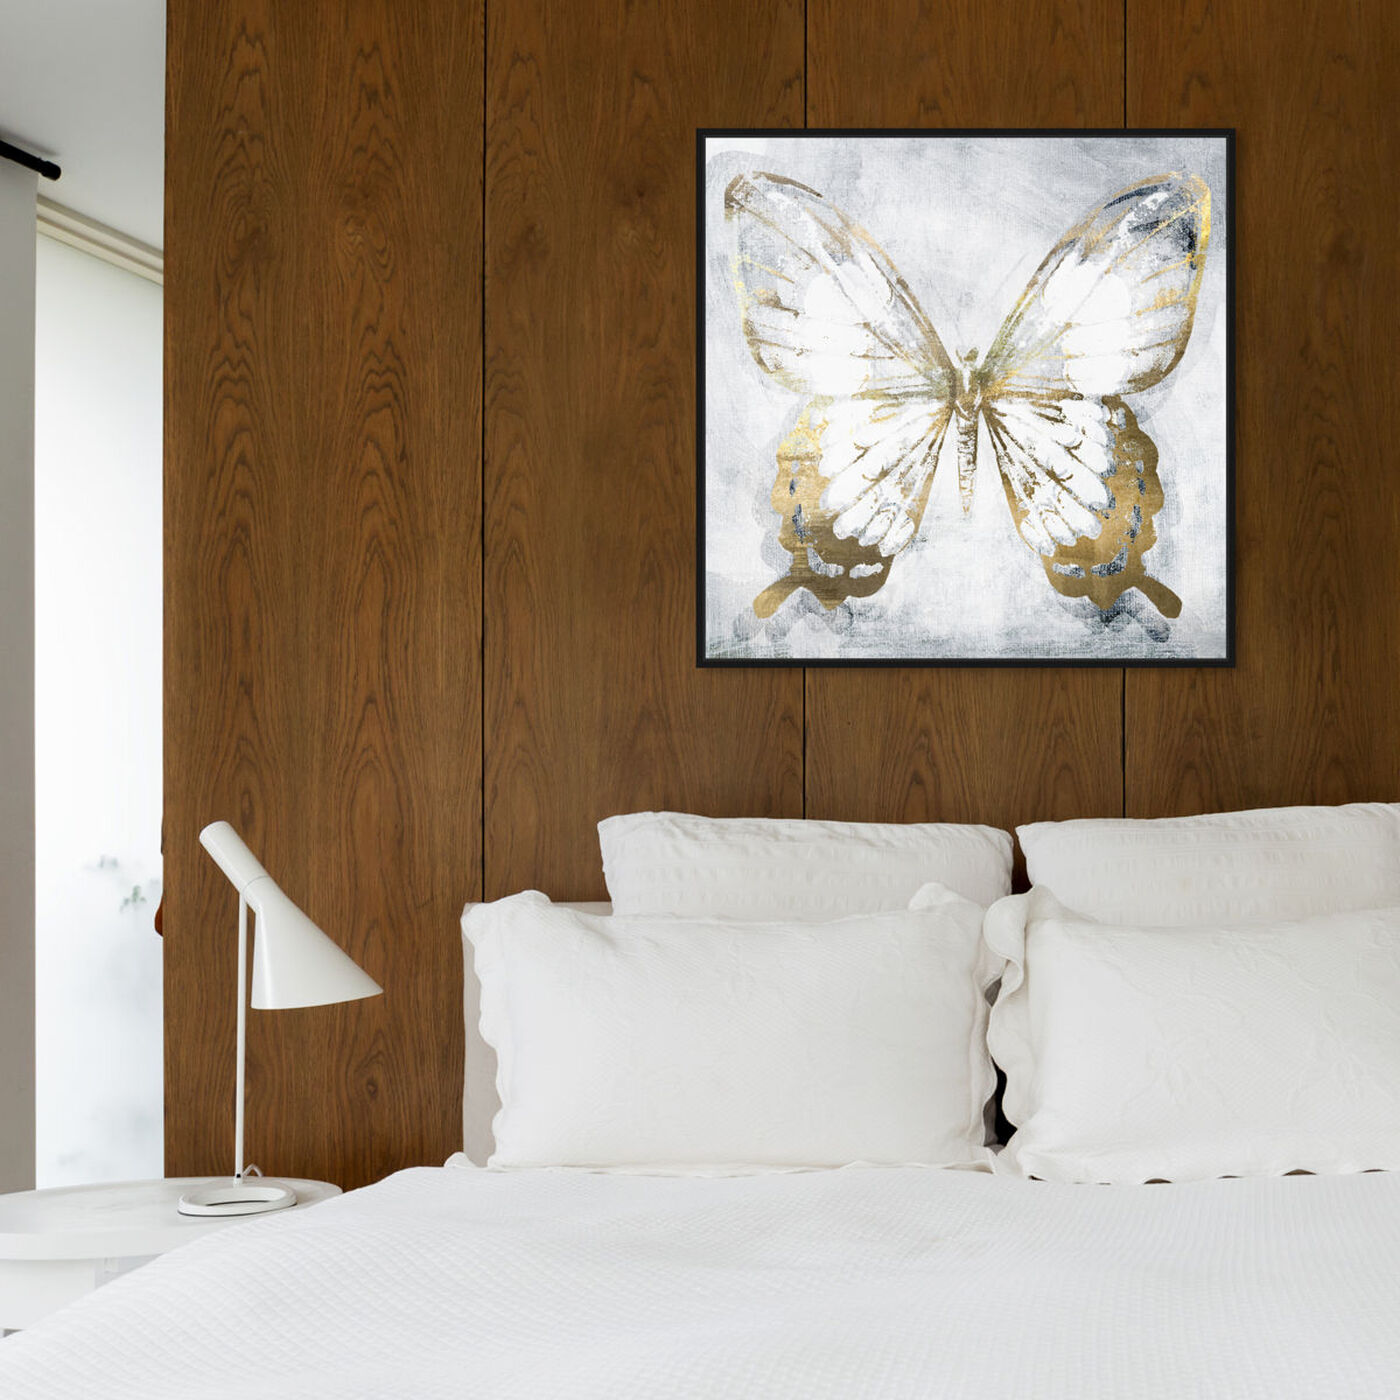 Hanging view of Butterfly Eroded featuring animals and insects art.